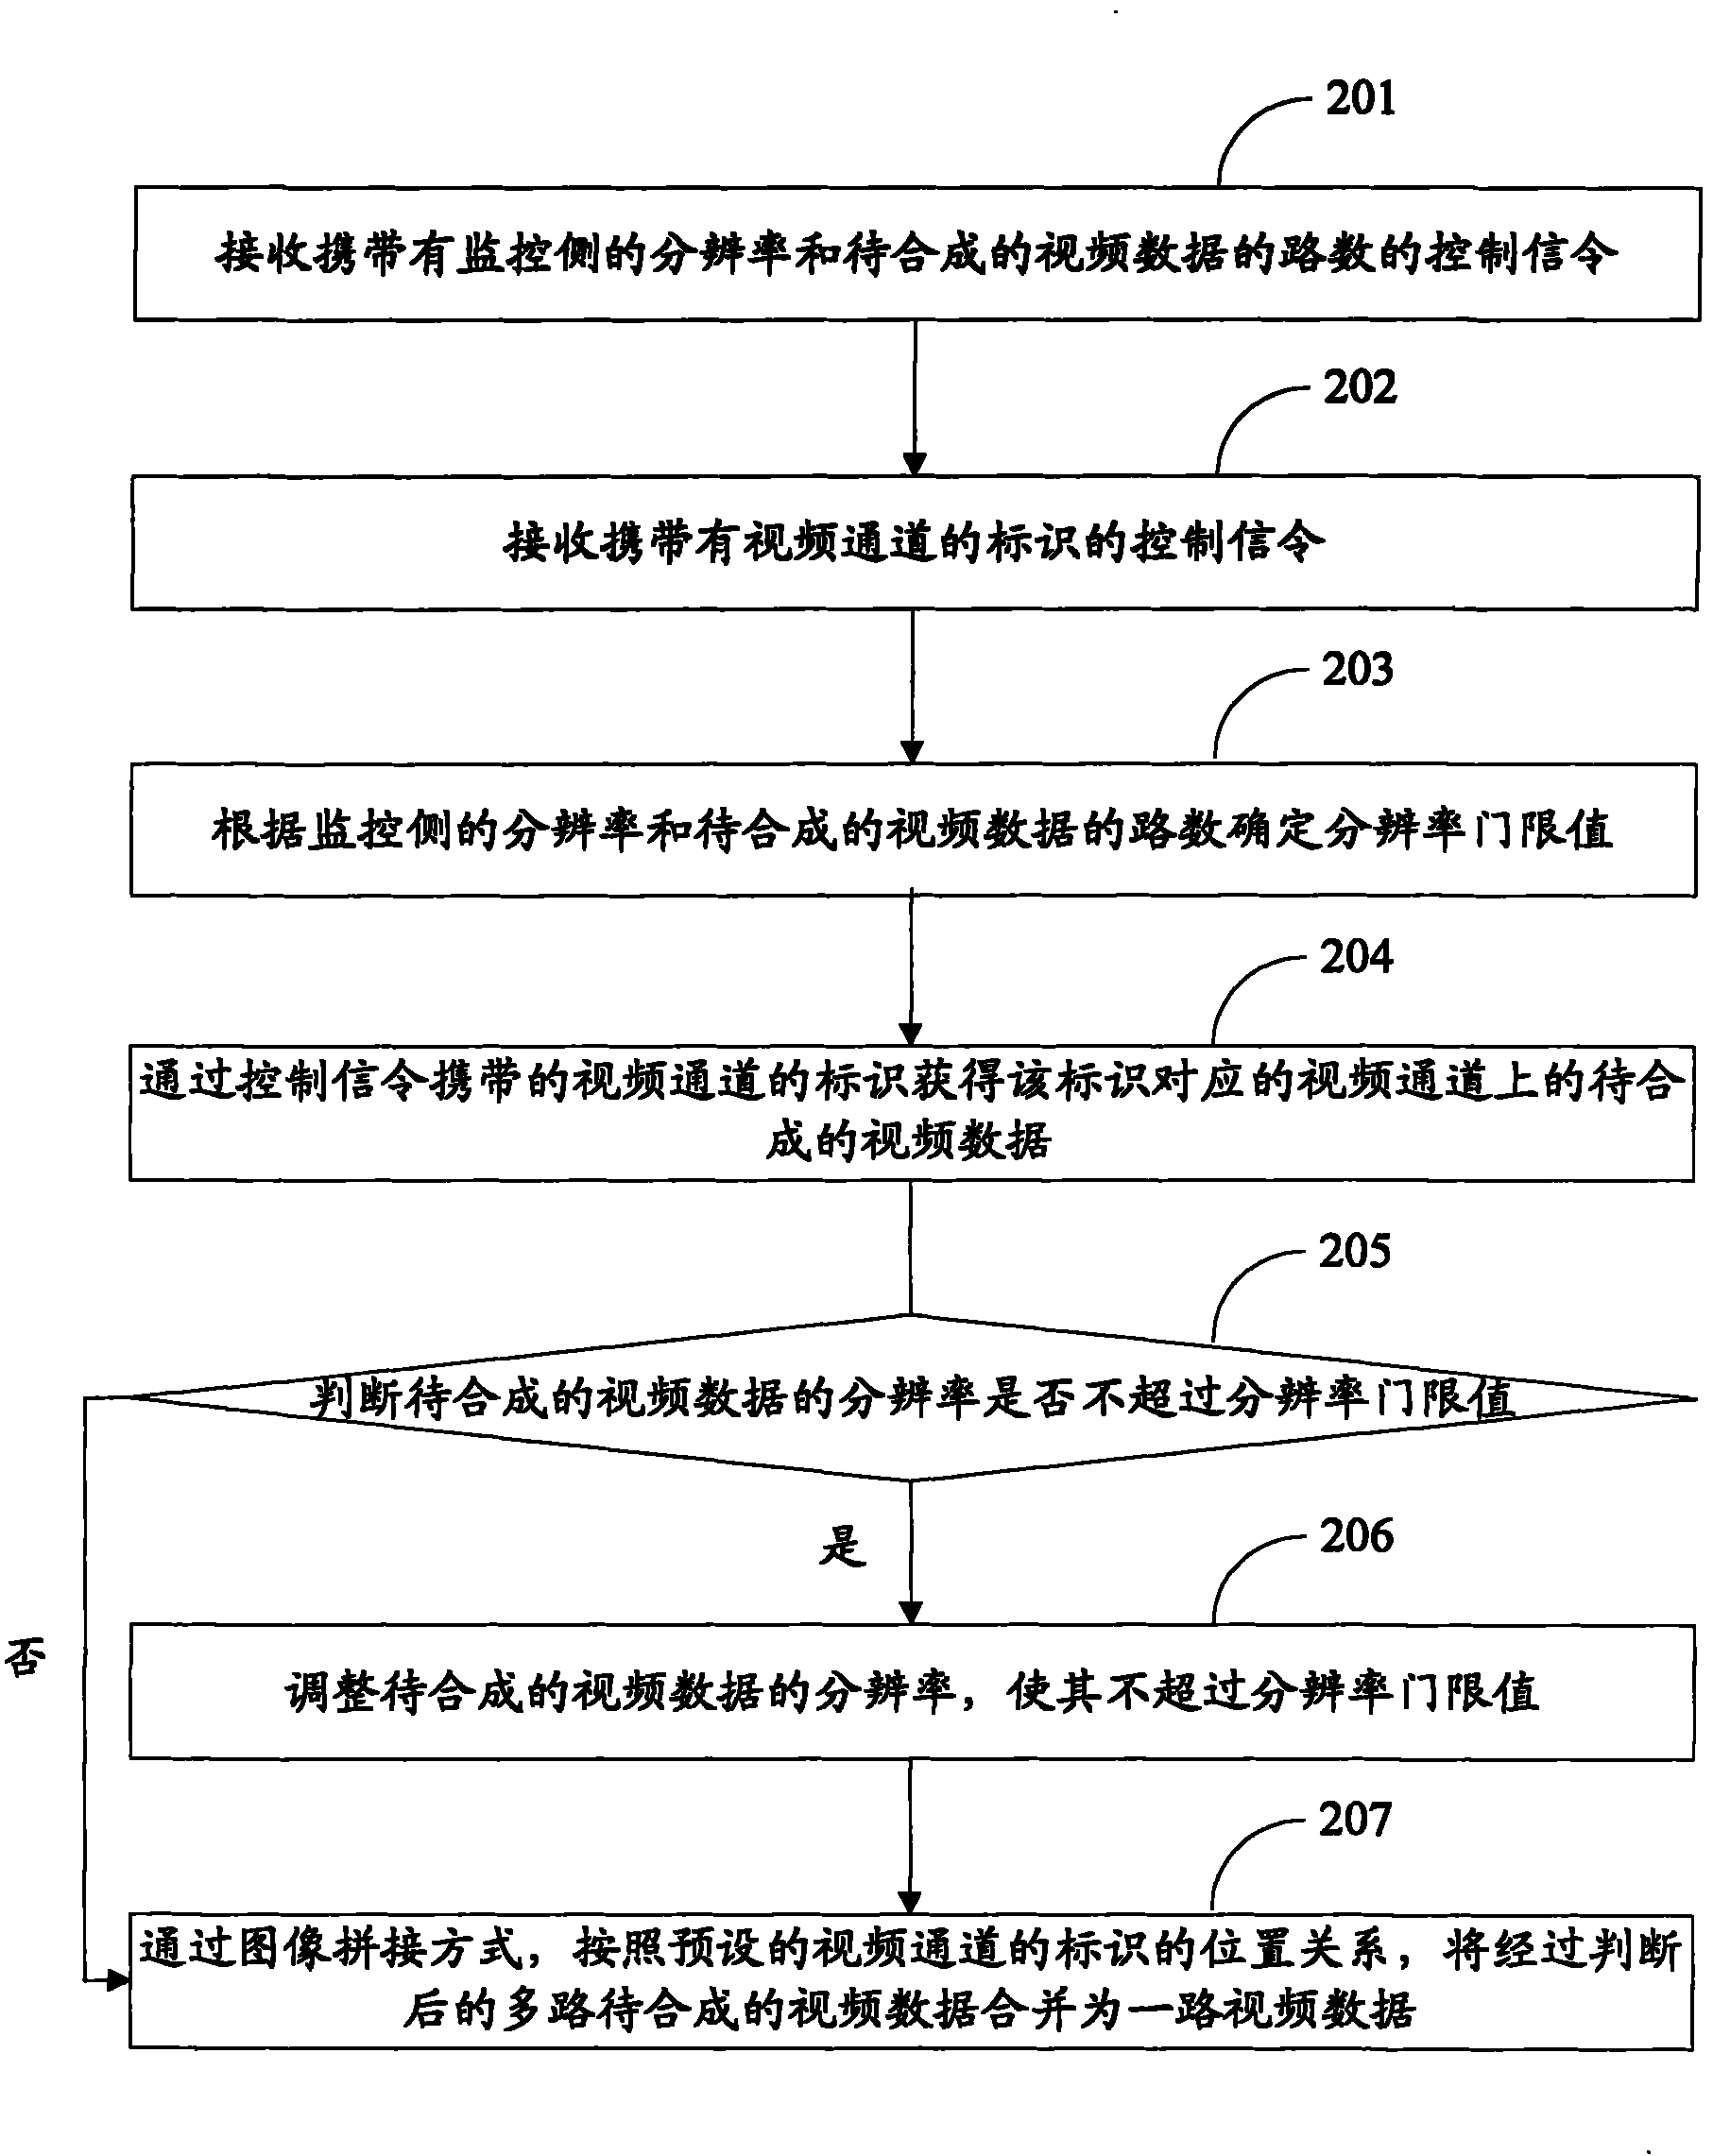 Video processing method, device and system